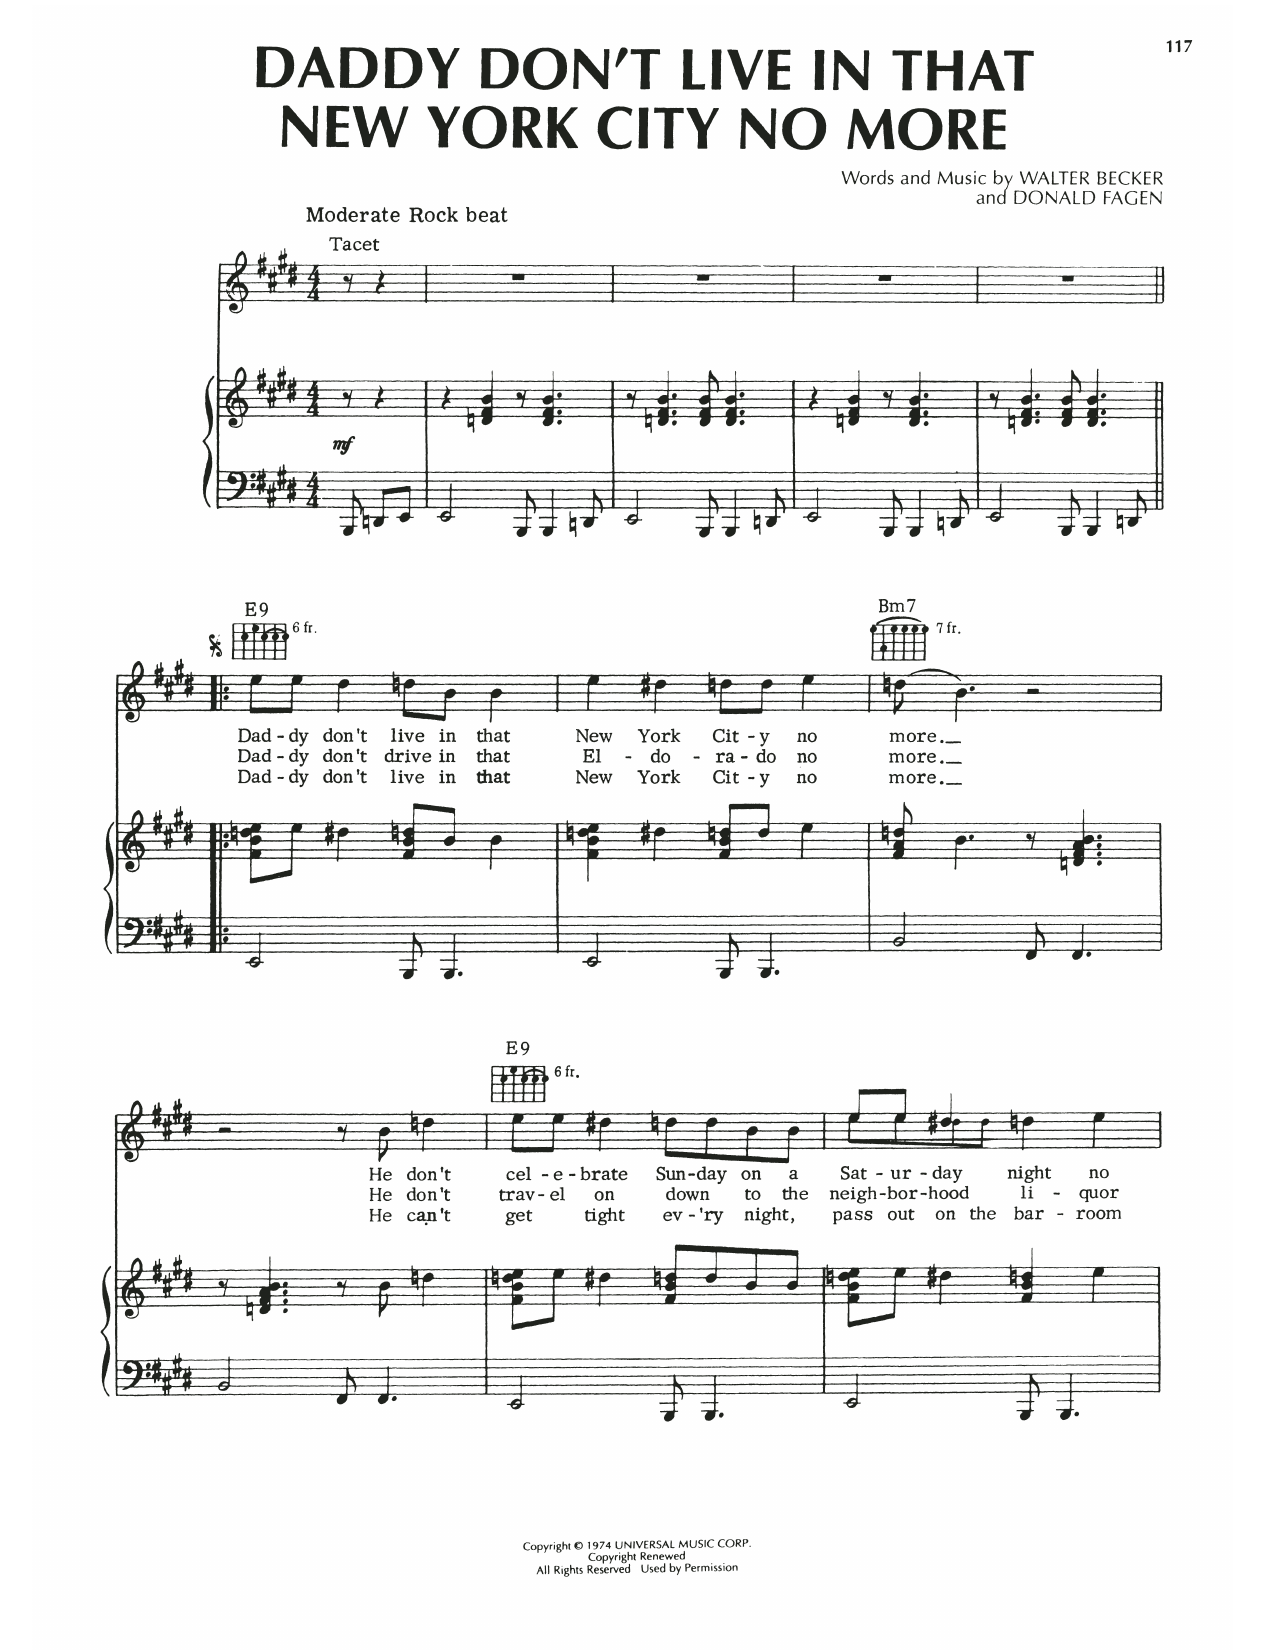 Download Steely Dan Daddy Don't Live In That New York City Sheet Music